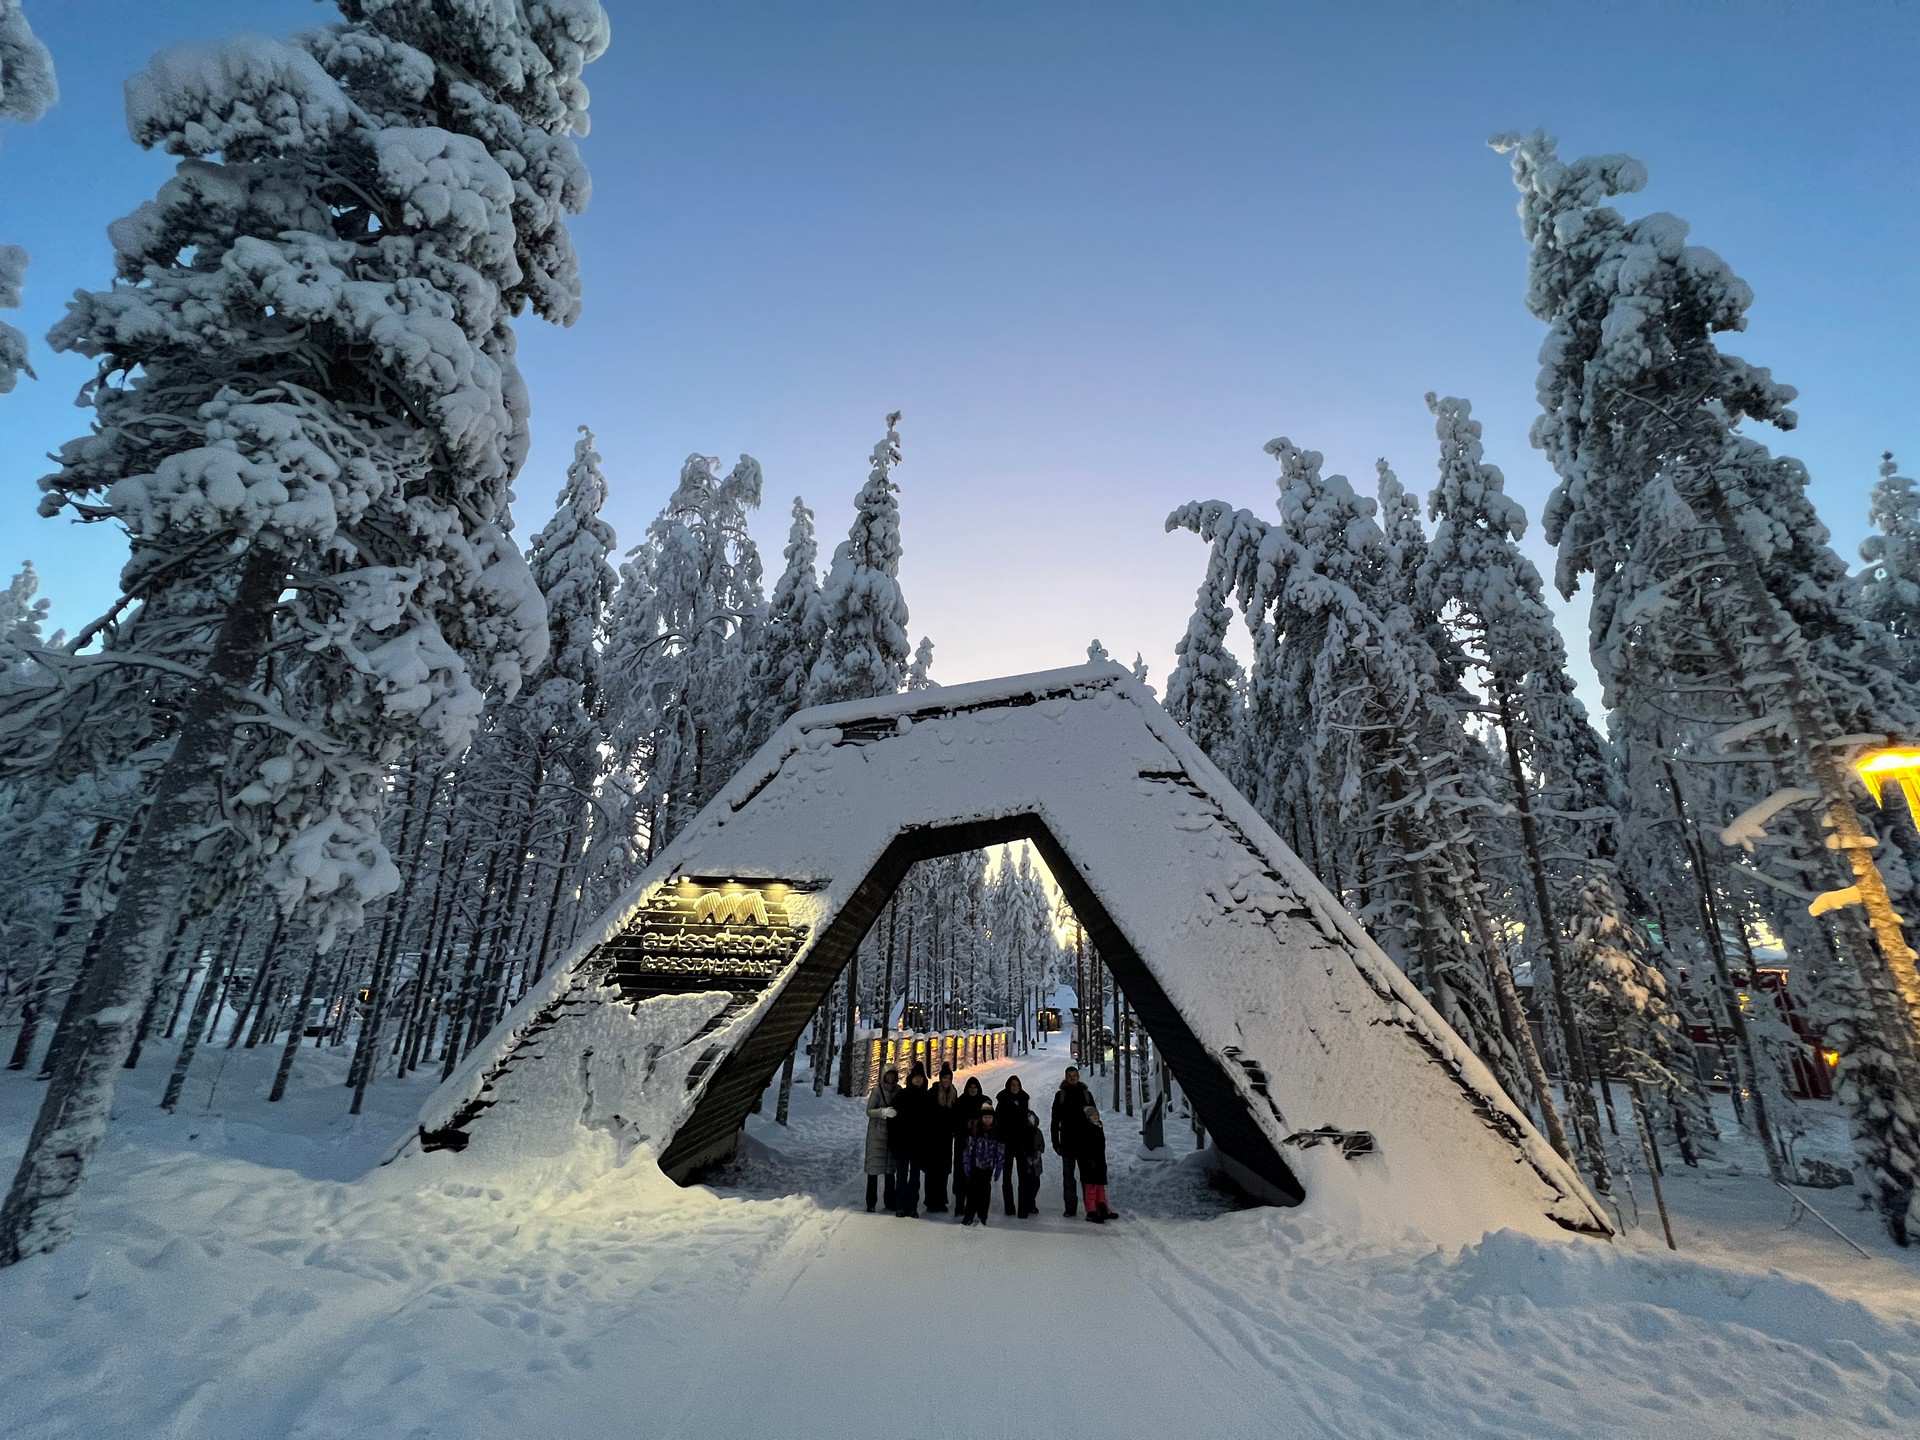 David Simpson and family at entrance arch of resort in Saariselka, Finland. The Lapland Series reflection post